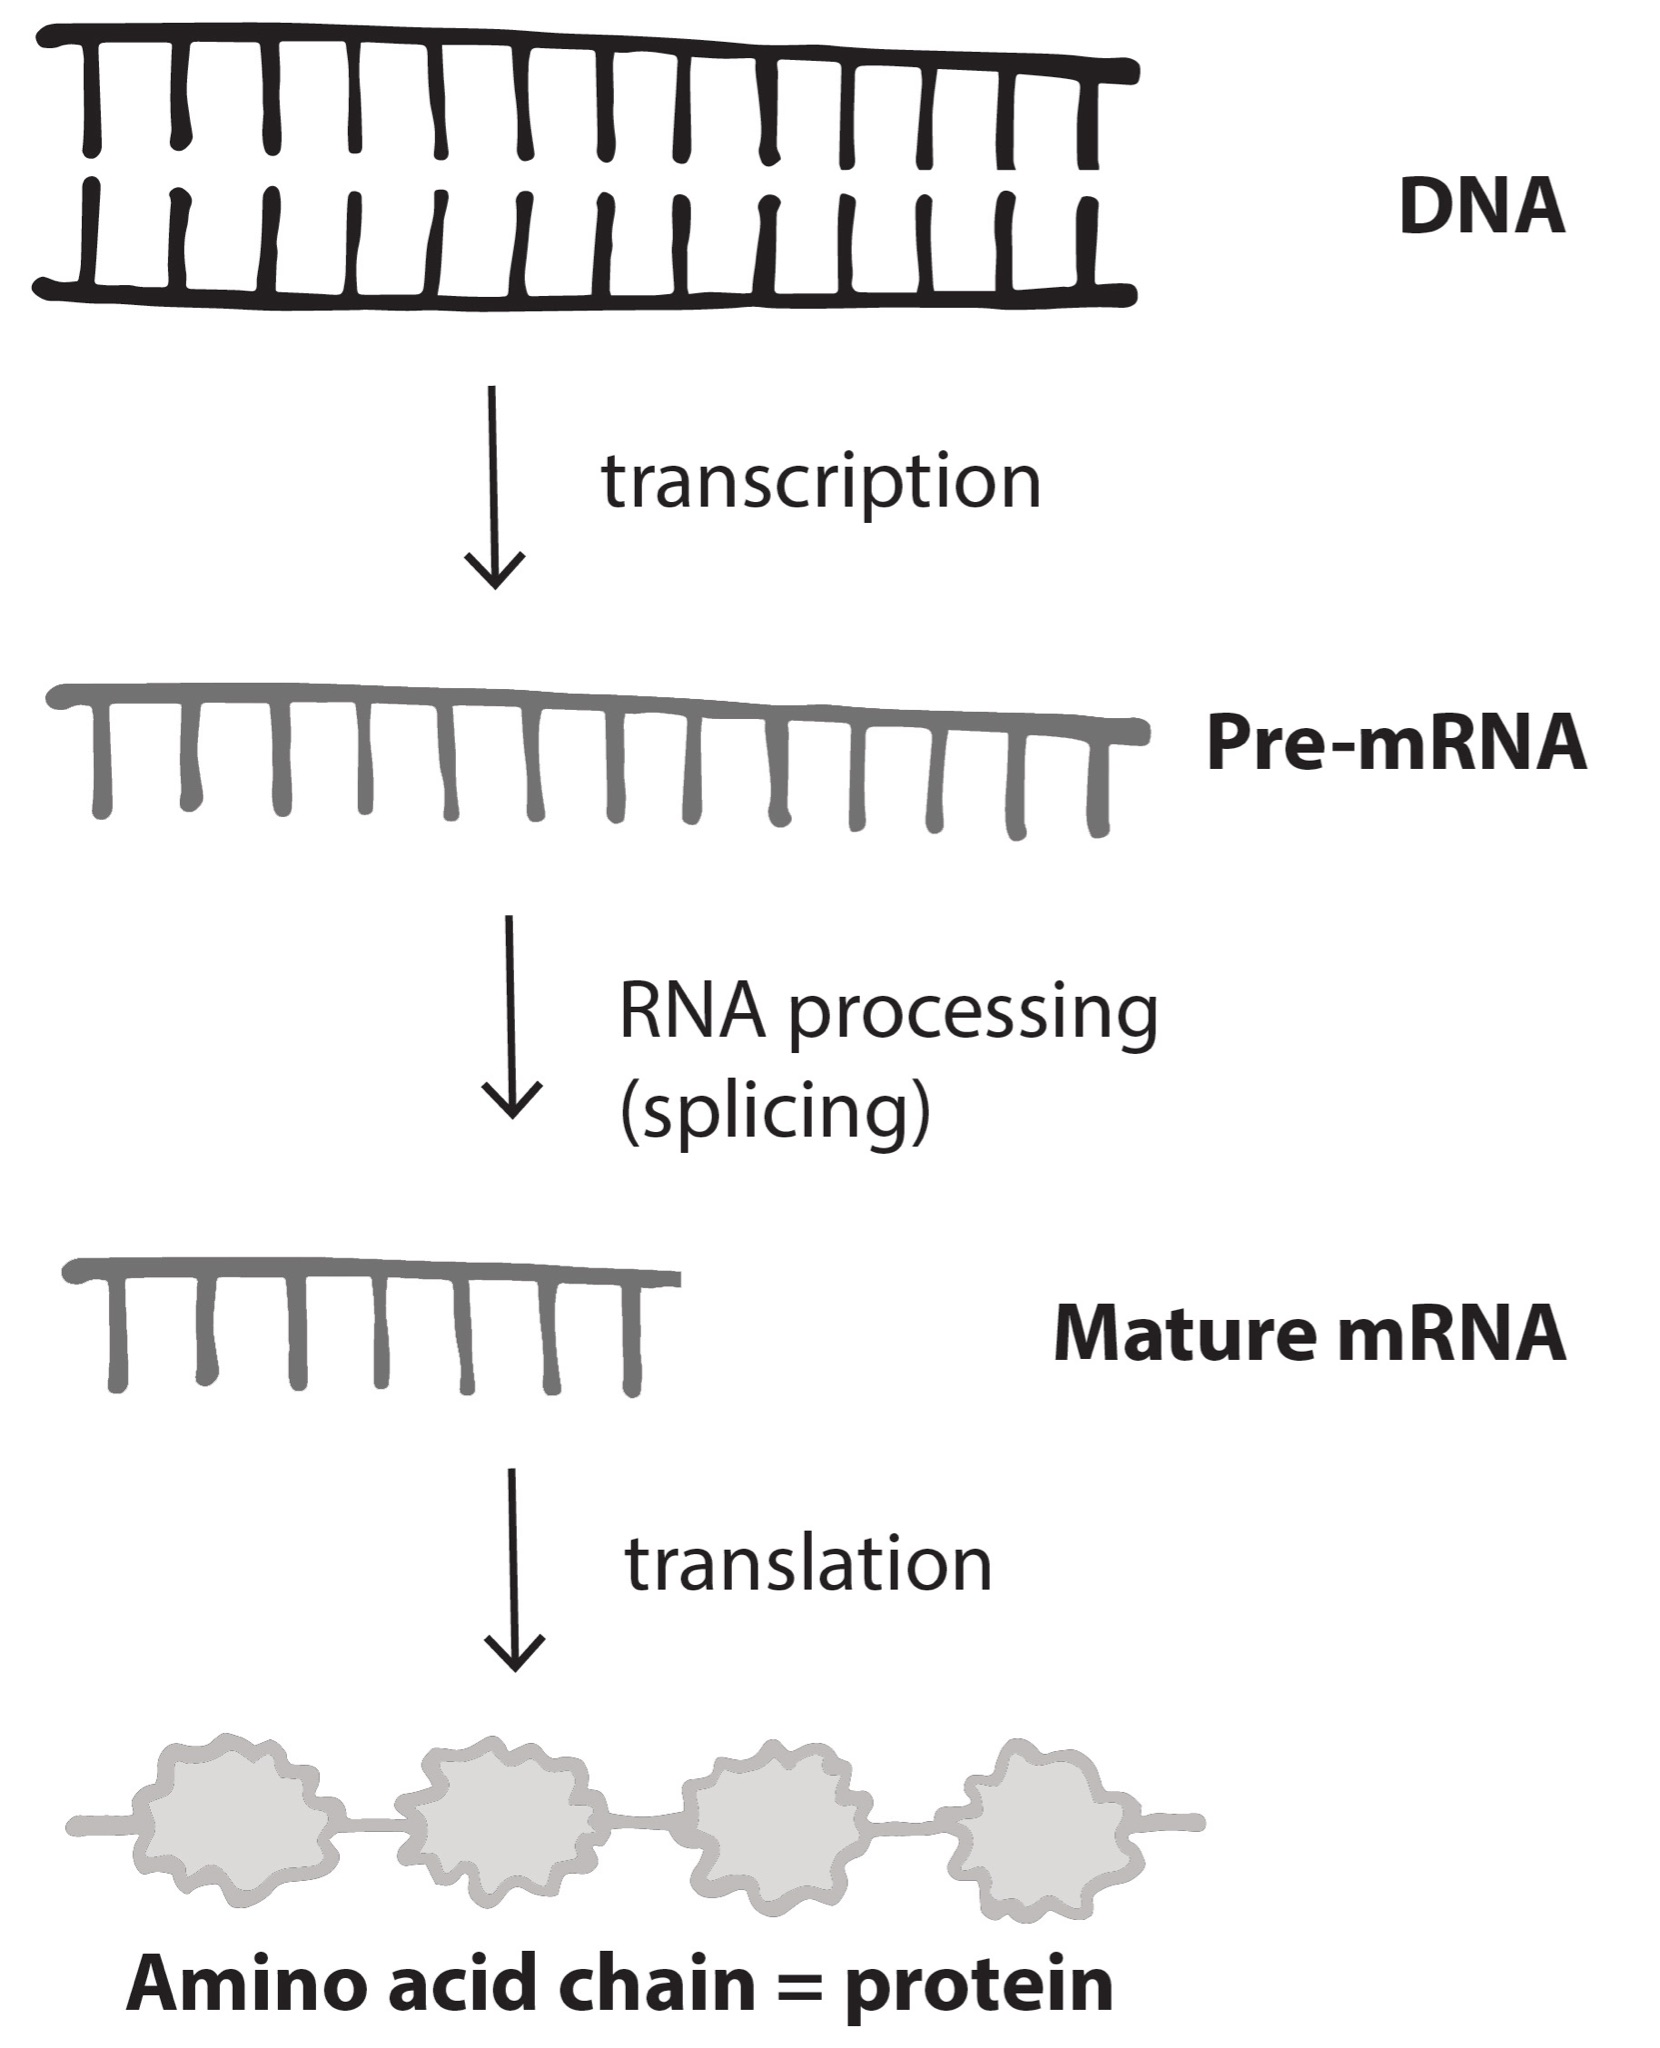 From DNA, transcription creates pre-mRNA, is processed to mature mRNA, translated to an amino acid chain (protein)